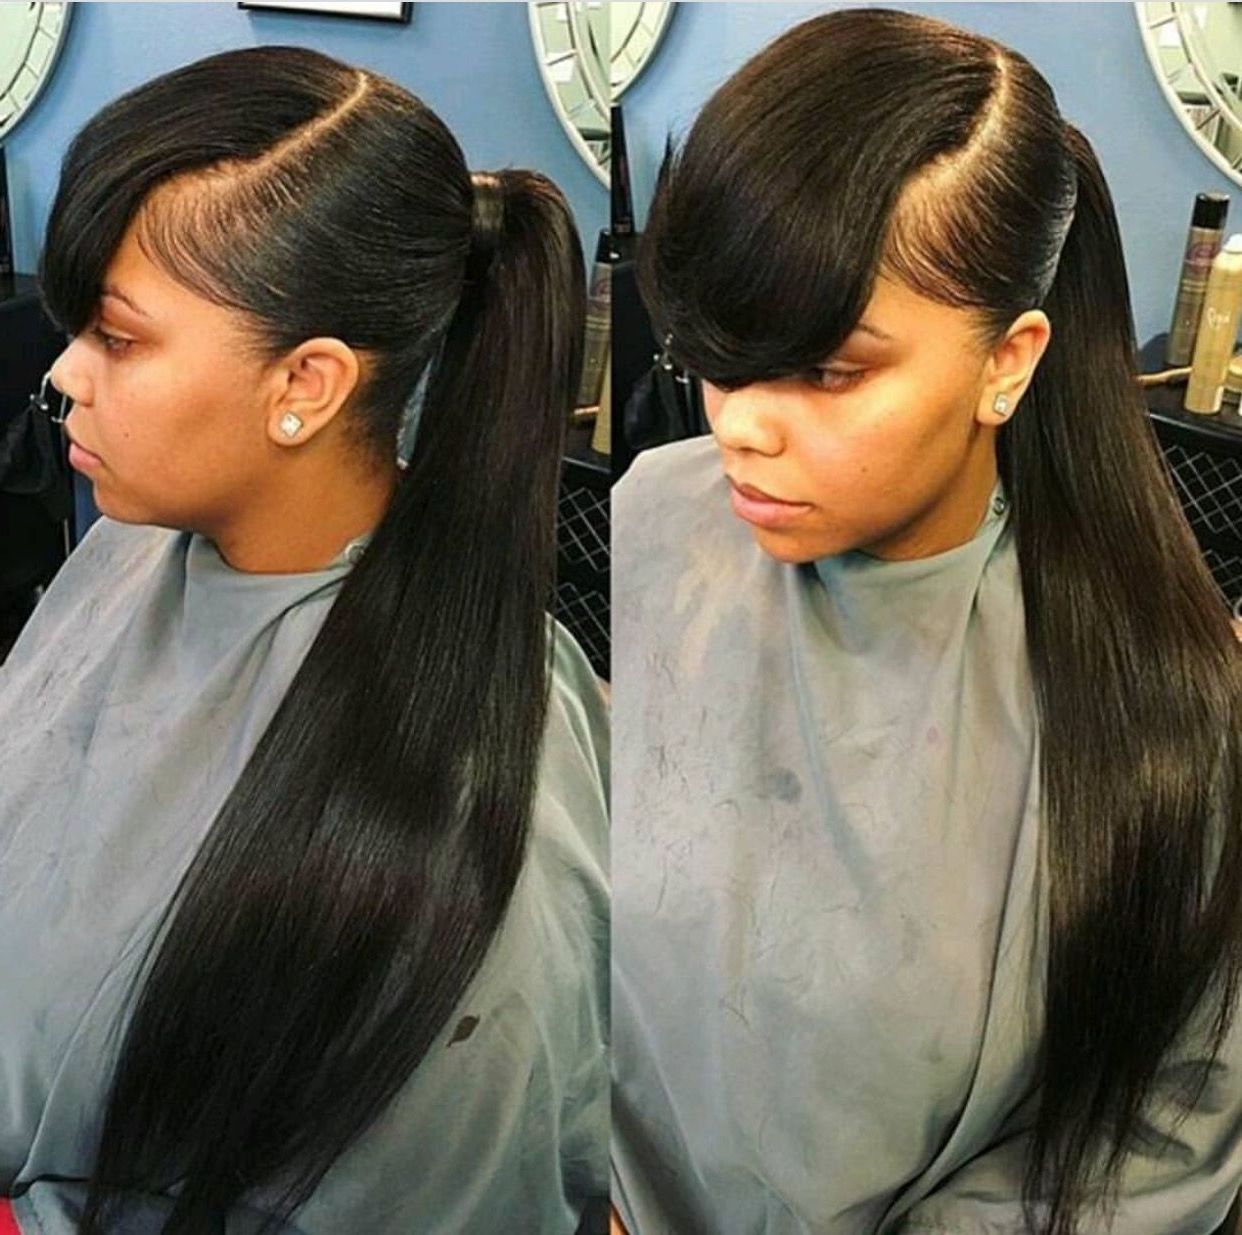 Natural Hair Growth With Regard To Most Current Sleek Pony Hairstyles With Thick Side Bangs (View 1 of 20)